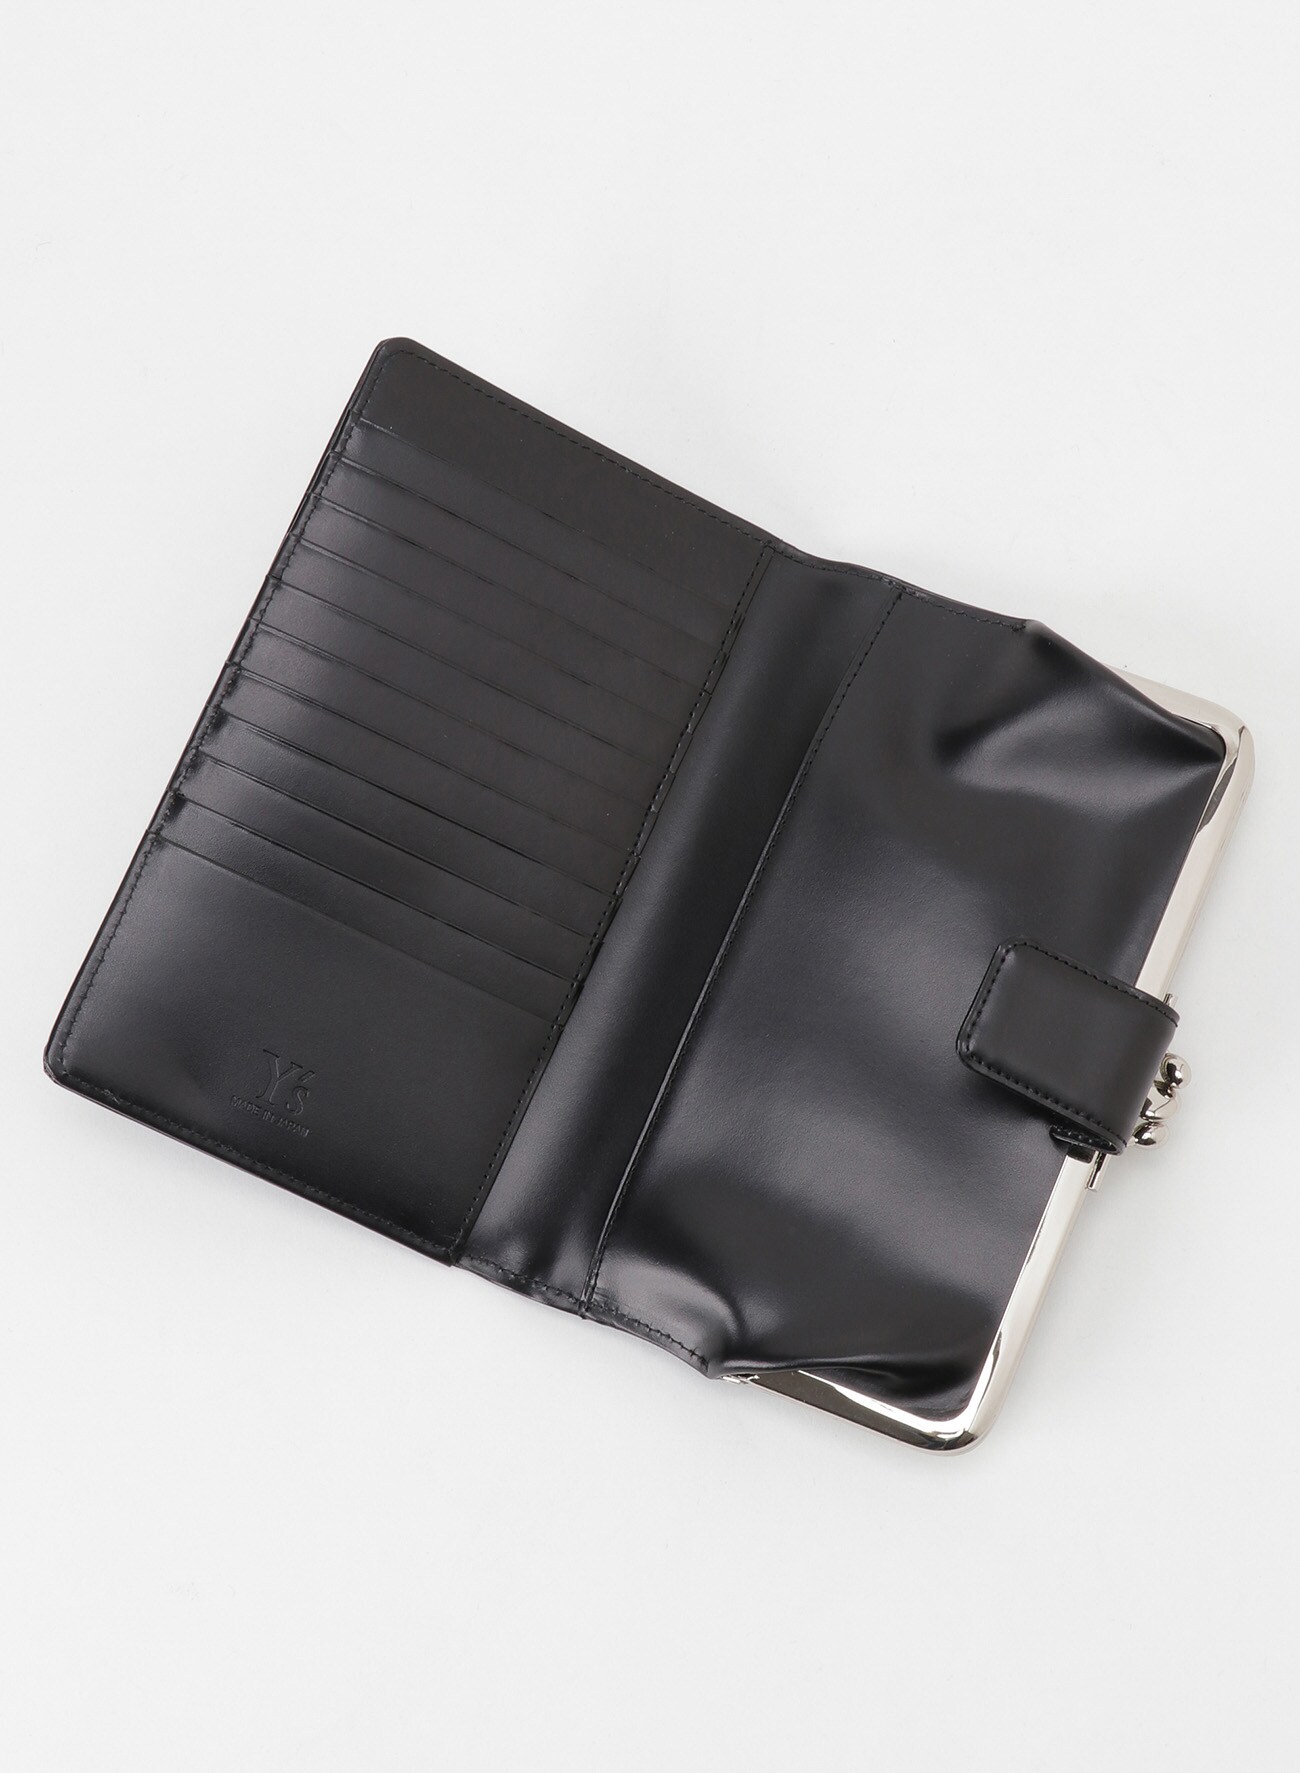 GLOSS SMOOTH LEATHER LONG WALLET(FREE SIZE Black): Y's｜THE SHOP